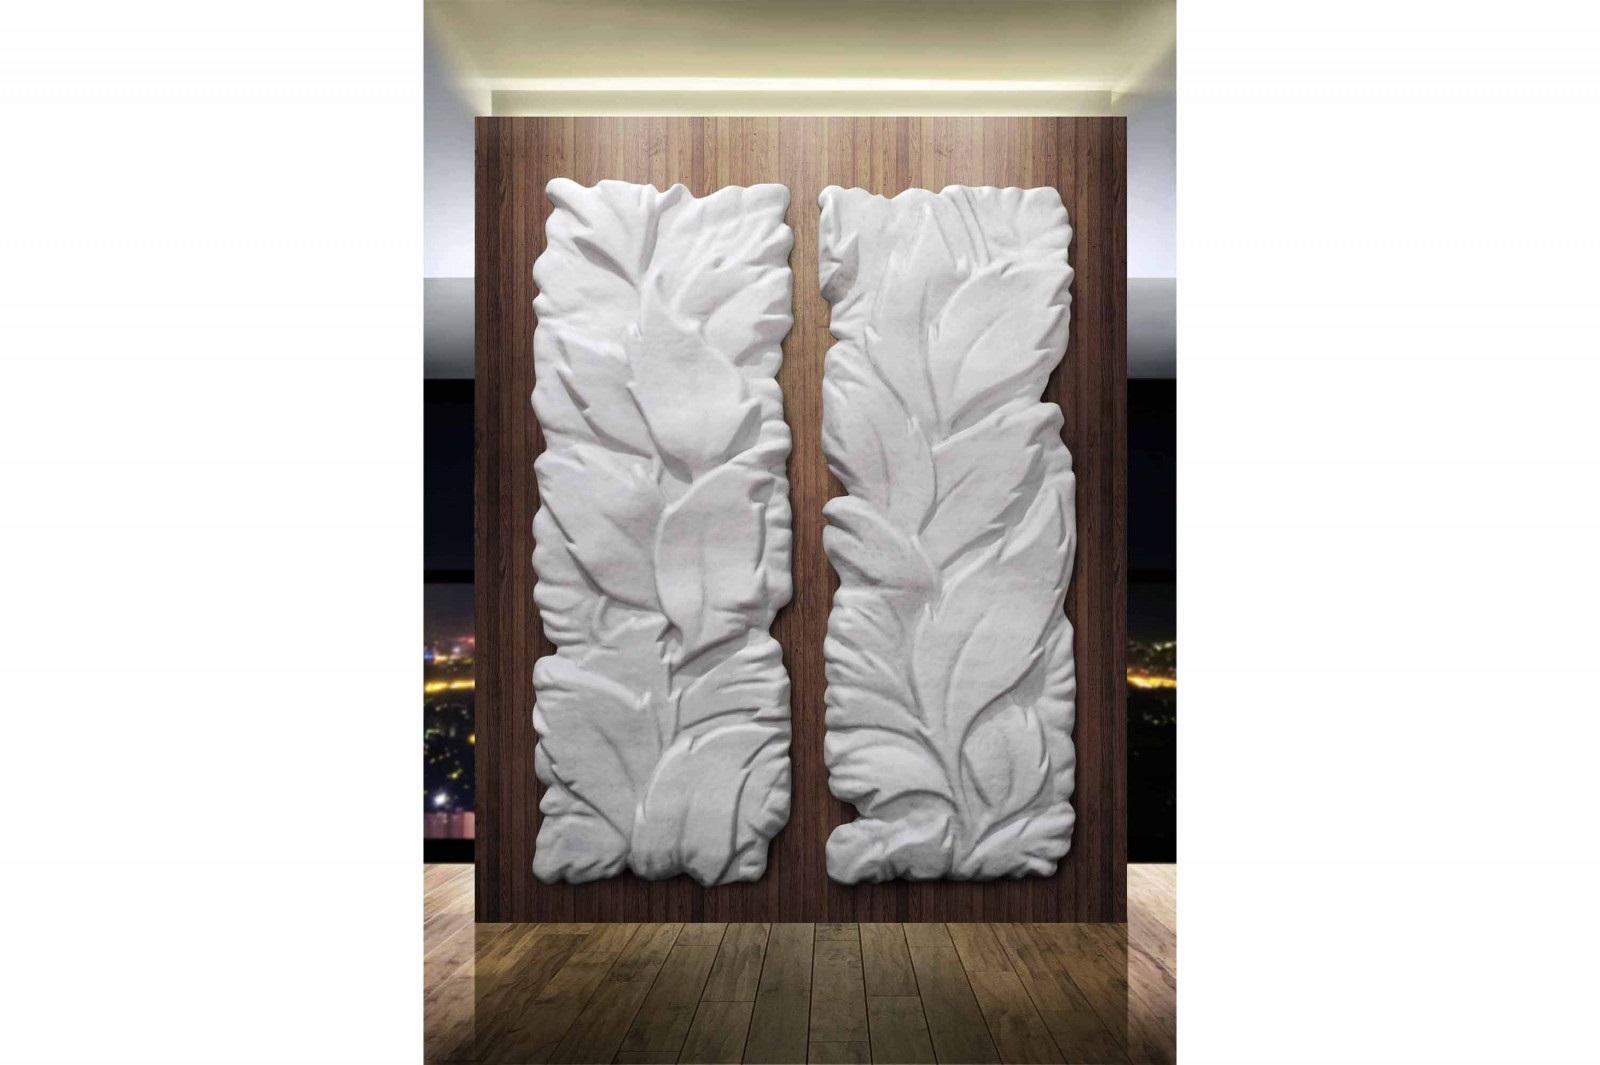 A set of 2 mirrored indoor and outdoor fiberglass 3D wall panel lacquered in white with aged finish to highlight the detailing of the sculpture.

Resin reinforced with fiberglass lacquered in any color for indoor use and in matte white lacquer for